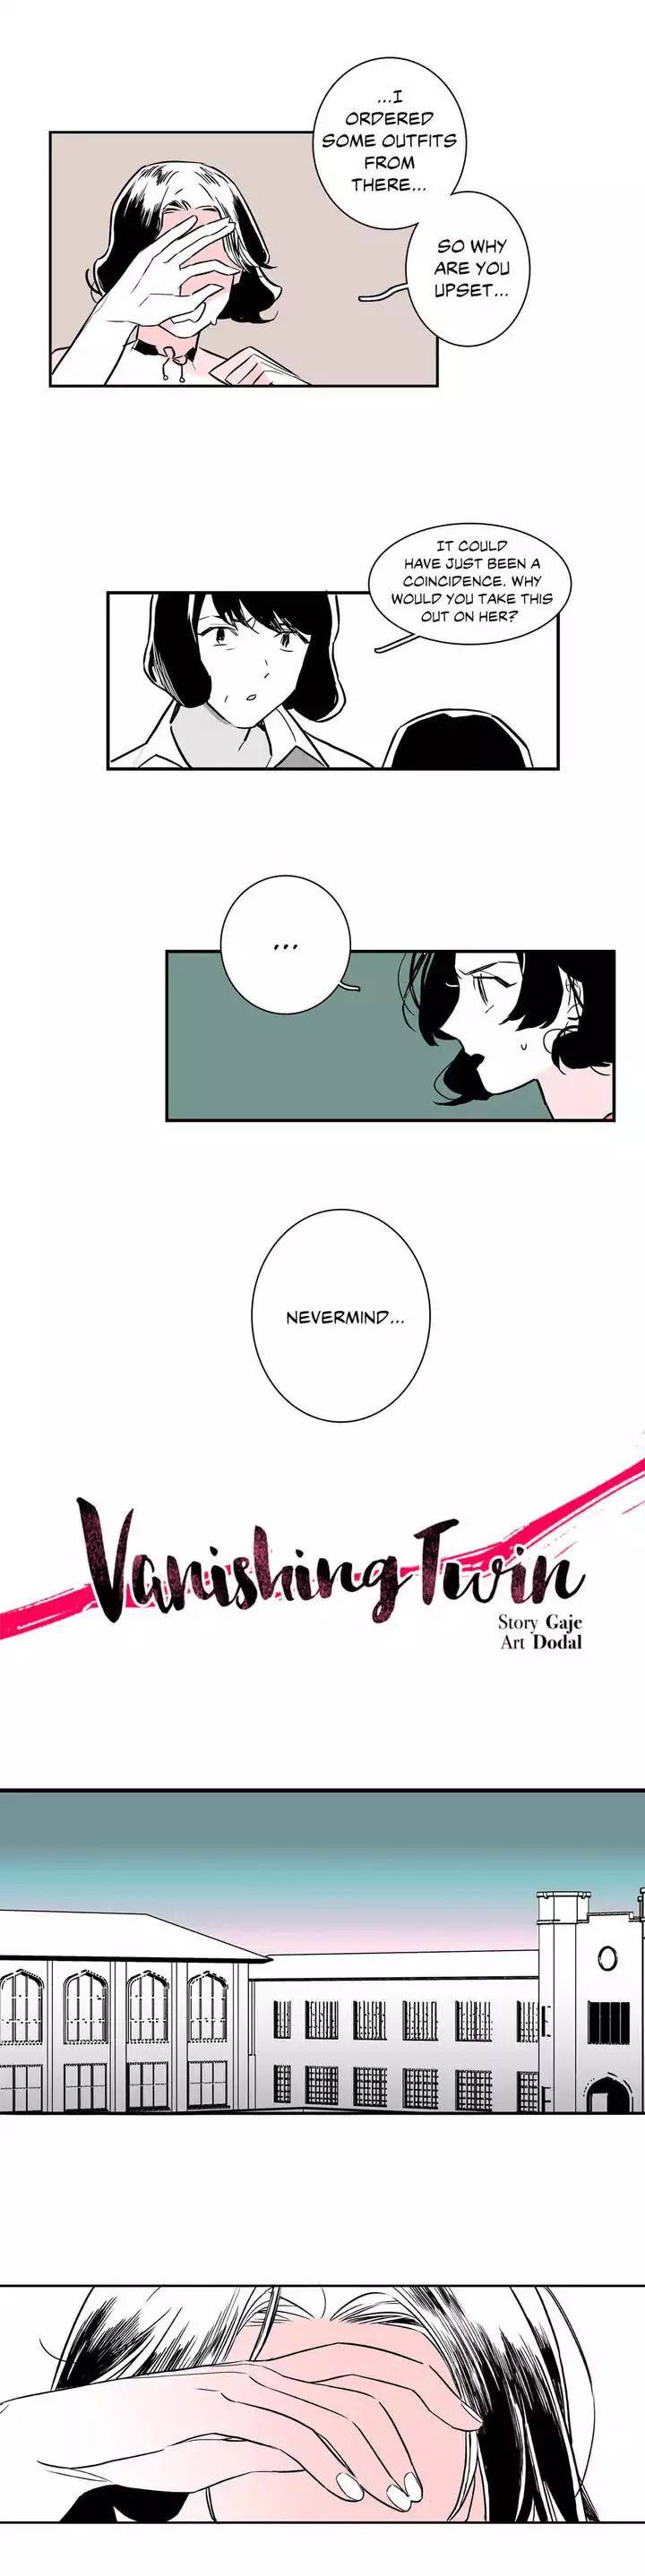 Vanishing Twin - Chapter 3 Page 7